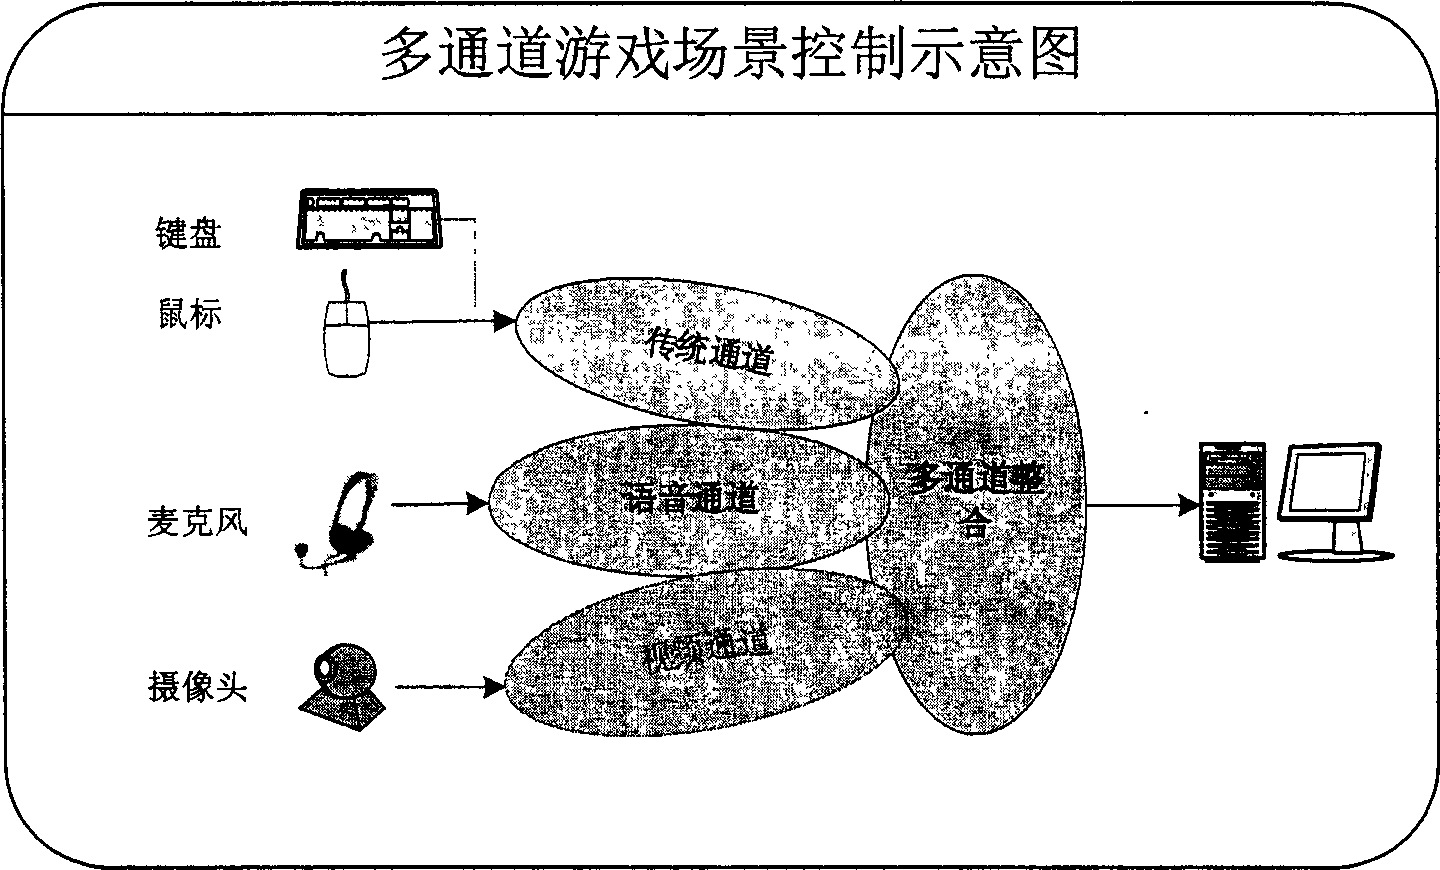 Method for controlling electronic game scene and role based on poses and voices of player